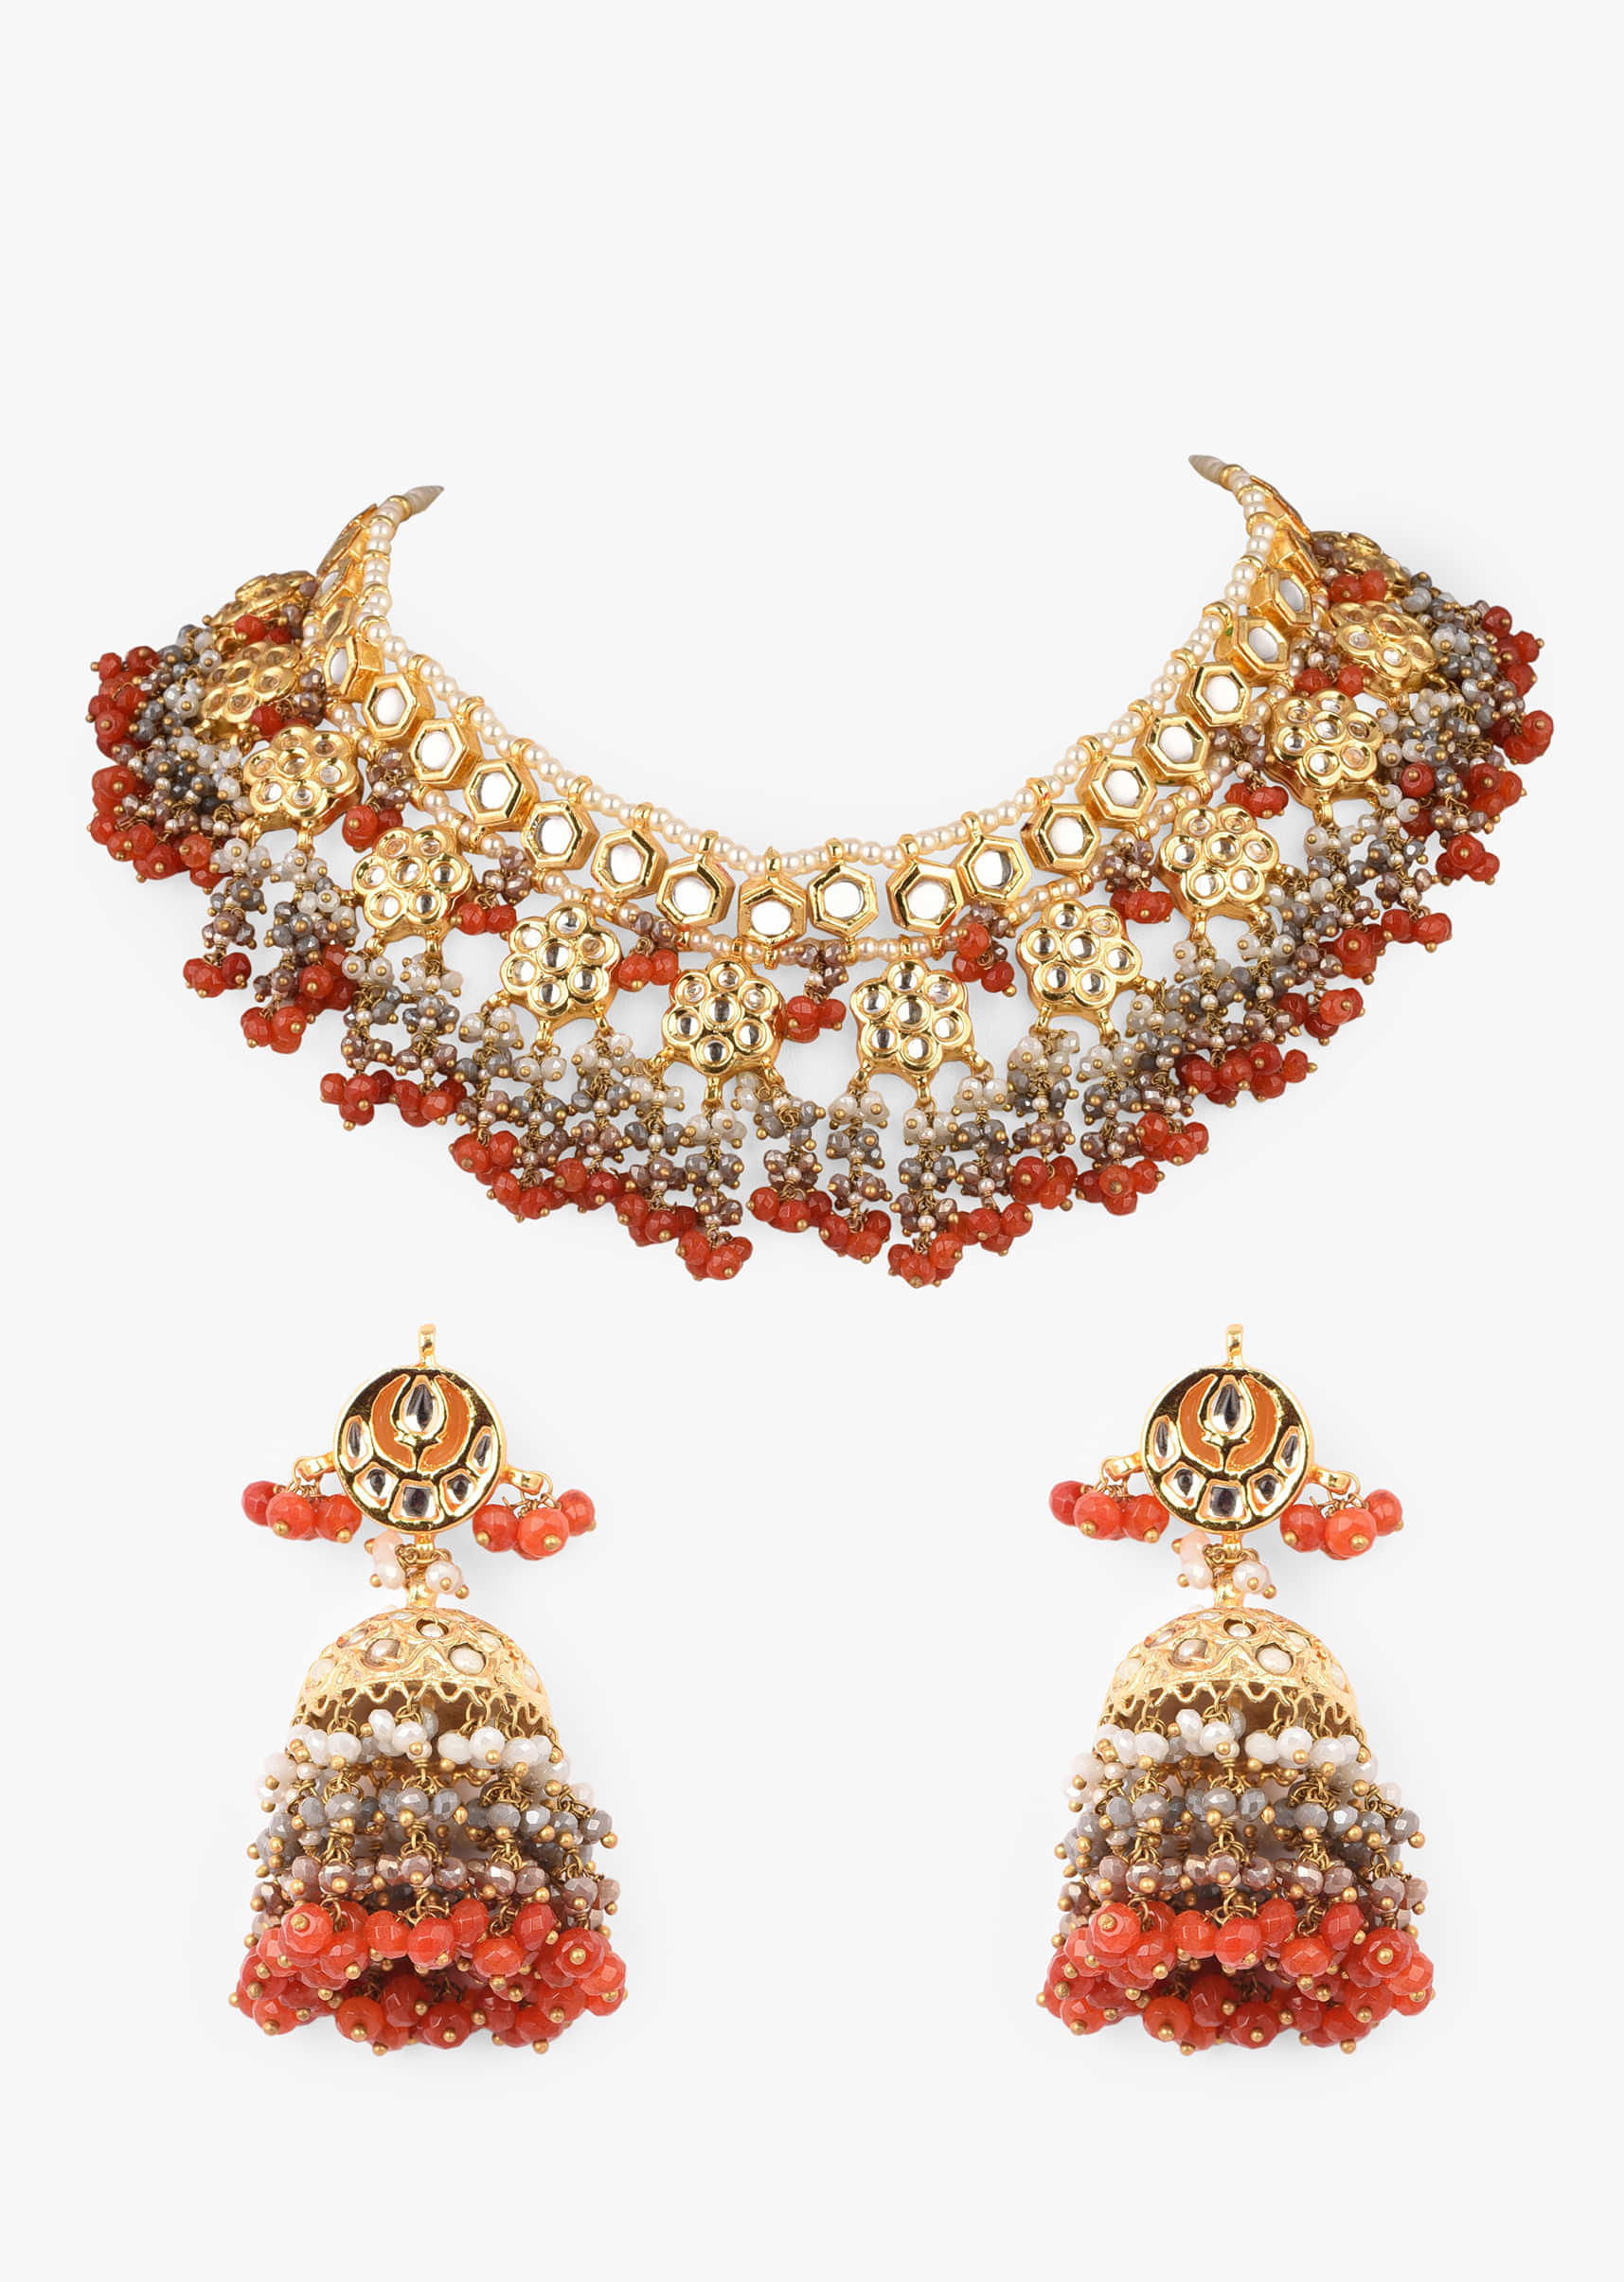 Gold Plated Necklace And Jhumka Set With Hexagon Polki And Beads Fringes In Coral And Grey Tones 